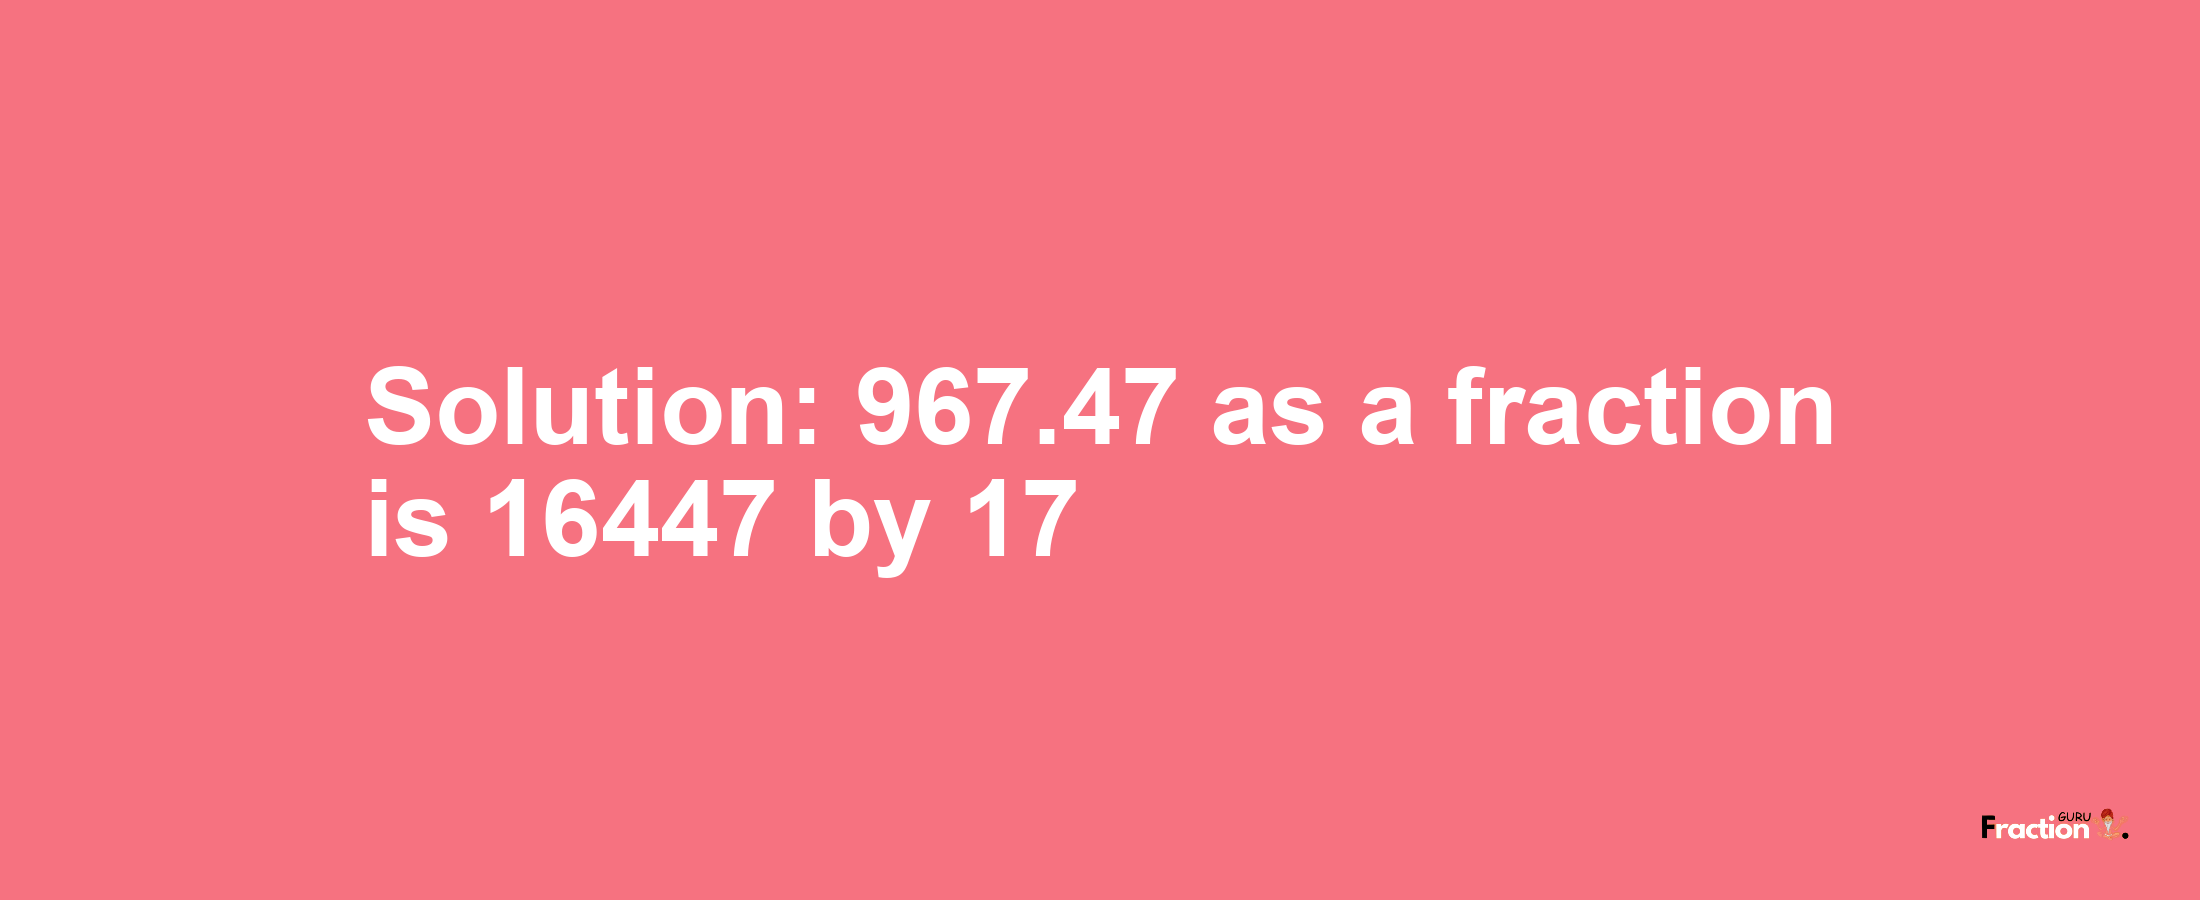 Solution:967.47 as a fraction is 16447/17